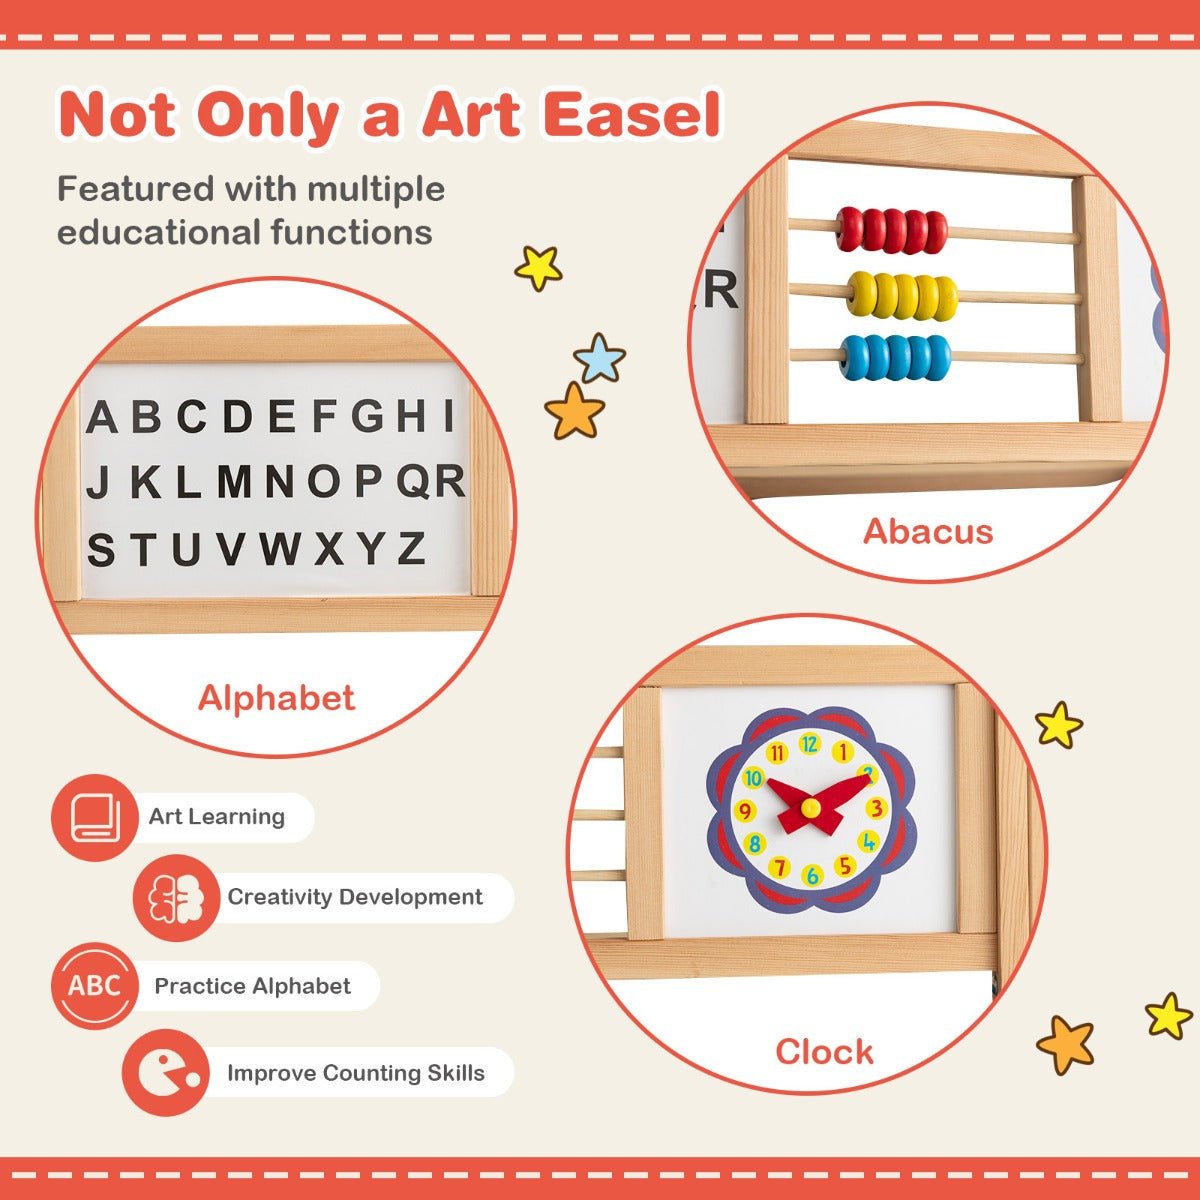 Unlock Imagination with the 3-in-1 Wooden Art Easel - Order Now!